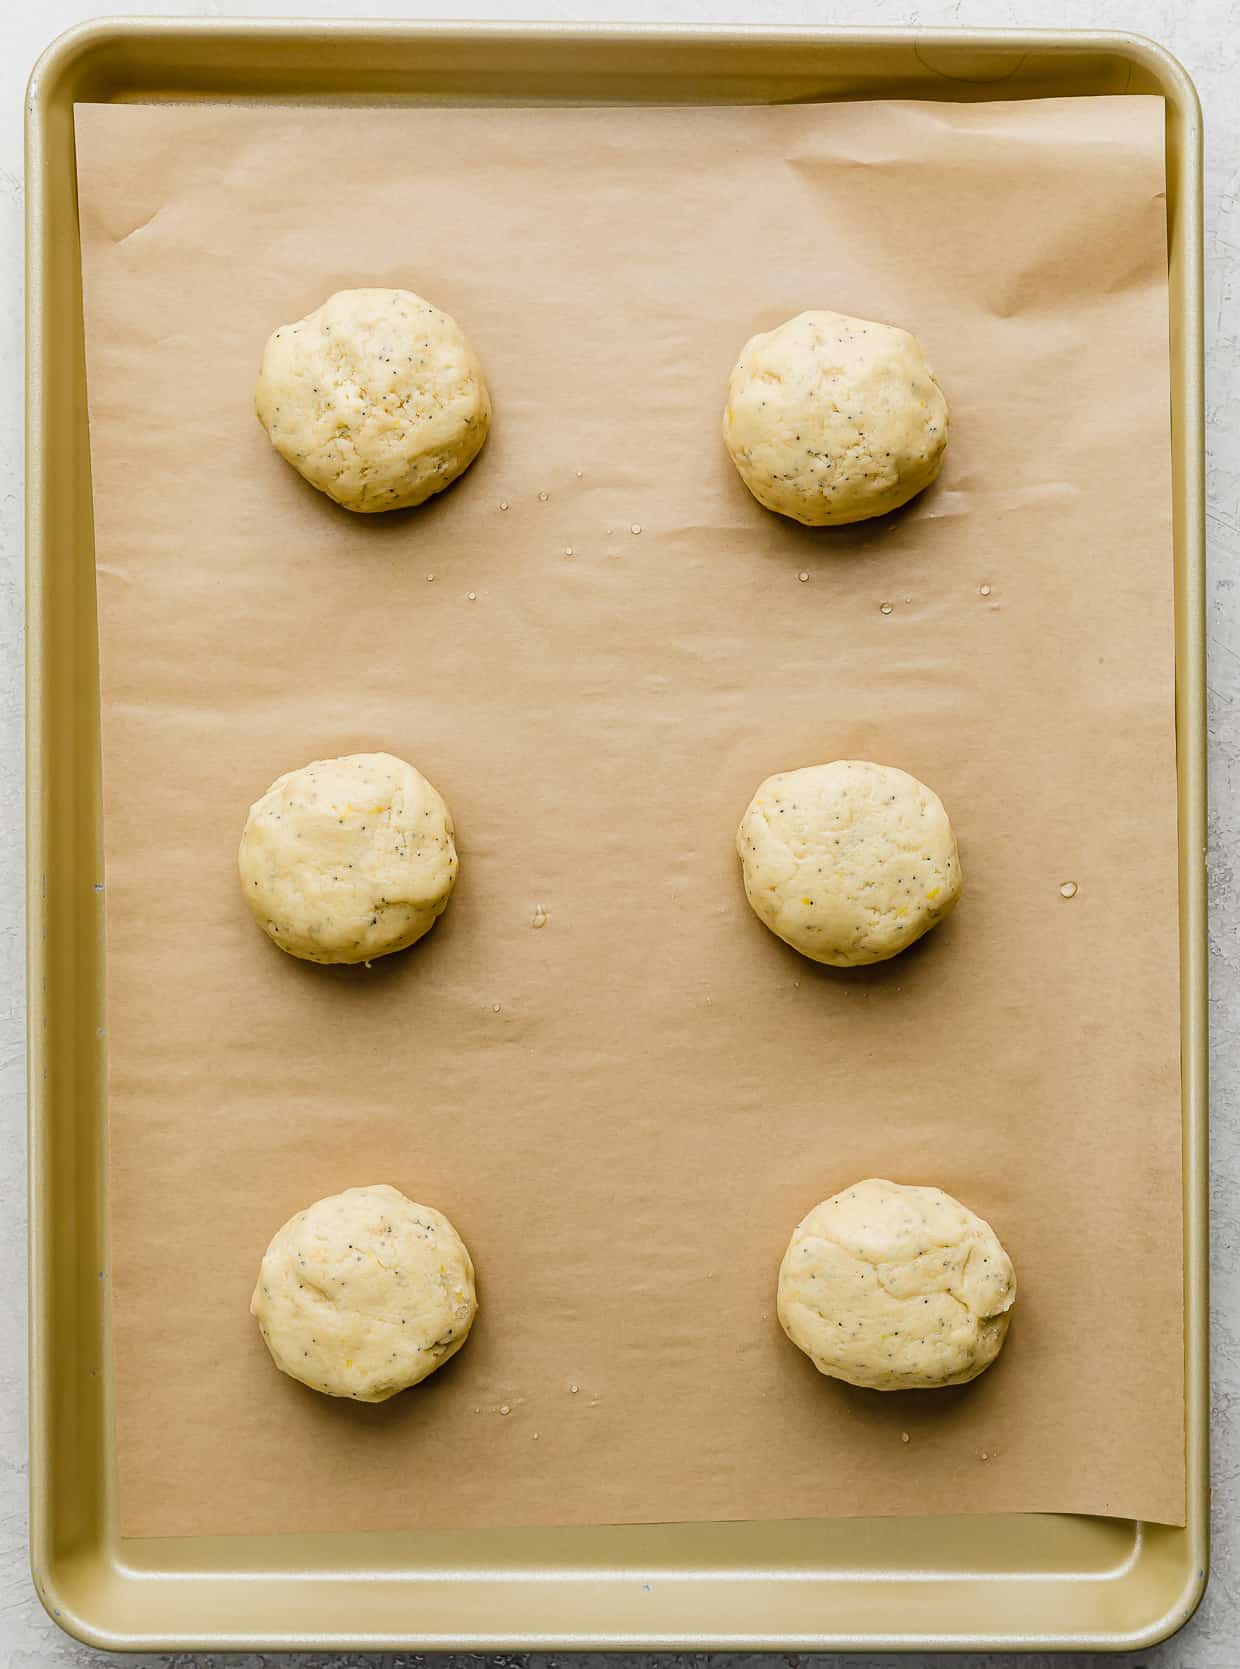 Lemon Poppy Seed Cookie dough balls on a tan parchment lined baking sheet, prior to baking.